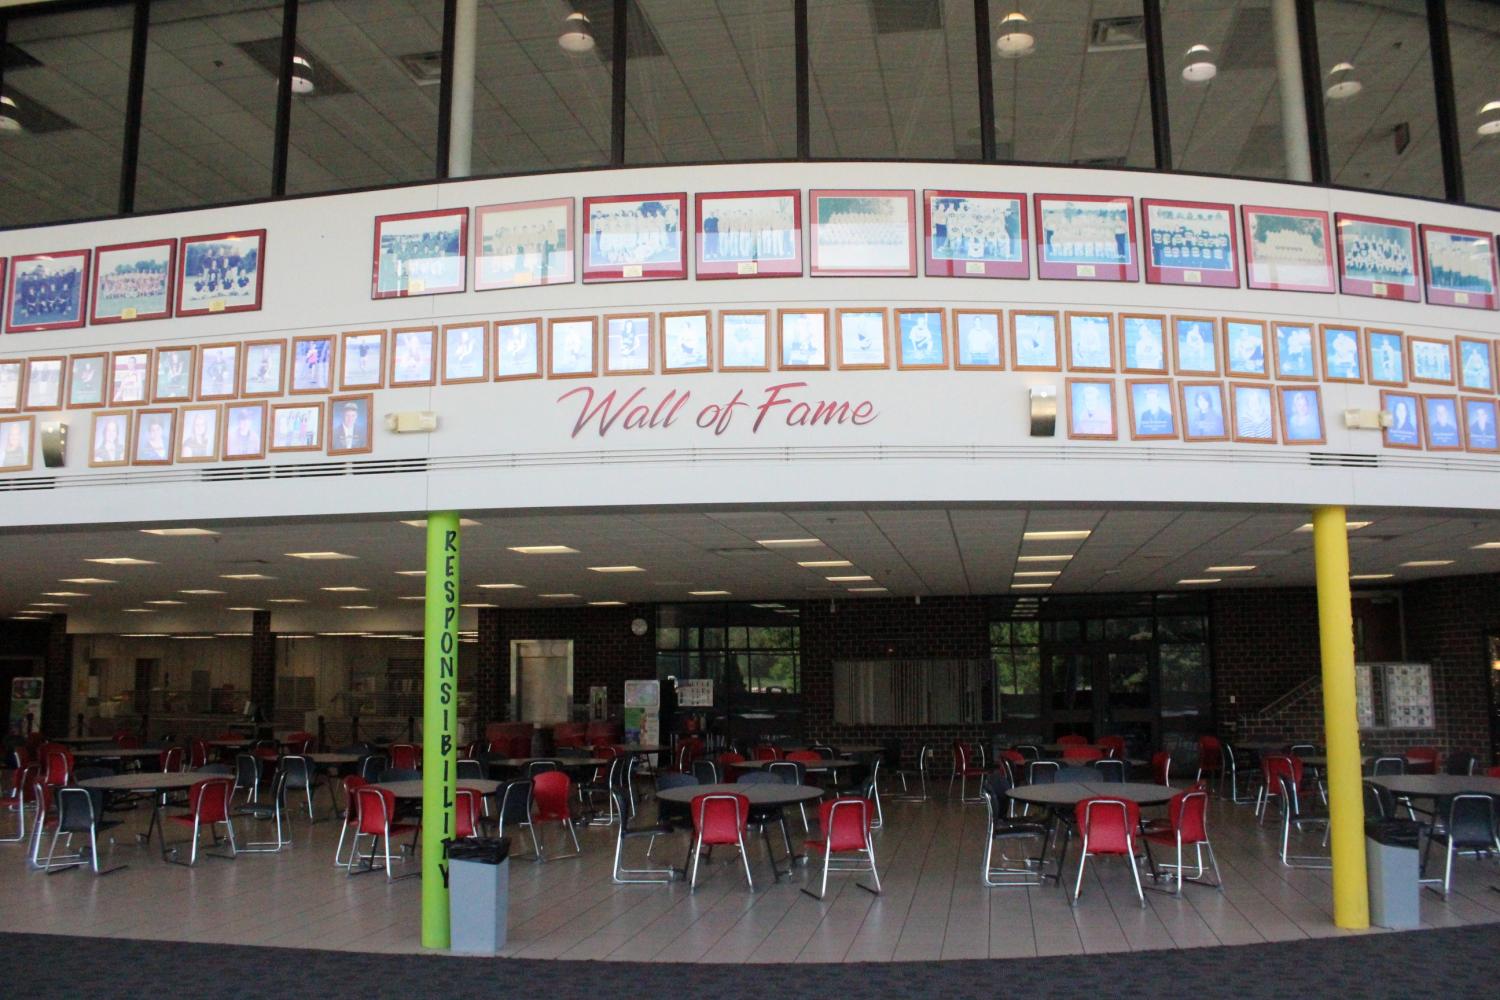 The Wall of Fame was placed in the middle school commons to feature the best and brightest of ADM students. John DenHerder, Elizabeth DenHerder, Chloe Spoonemore, Marissa Meadowcroft, and Emma Rikers photos will be added for going above and beyond in their respective activities.